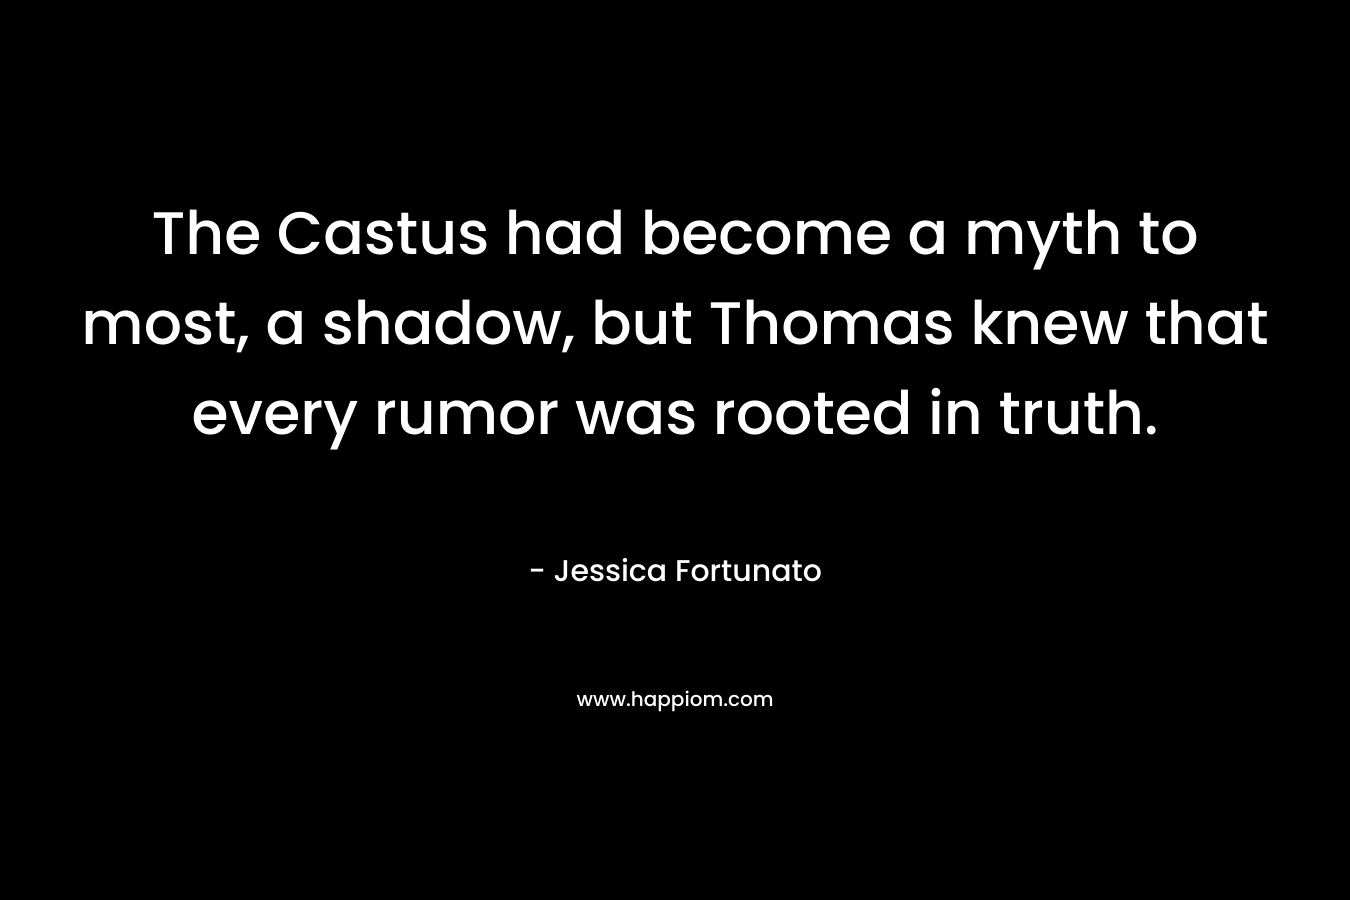 The Castus had become a myth to most, a shadow, but Thomas knew that every rumor was rooted in truth. – Jessica Fortunato